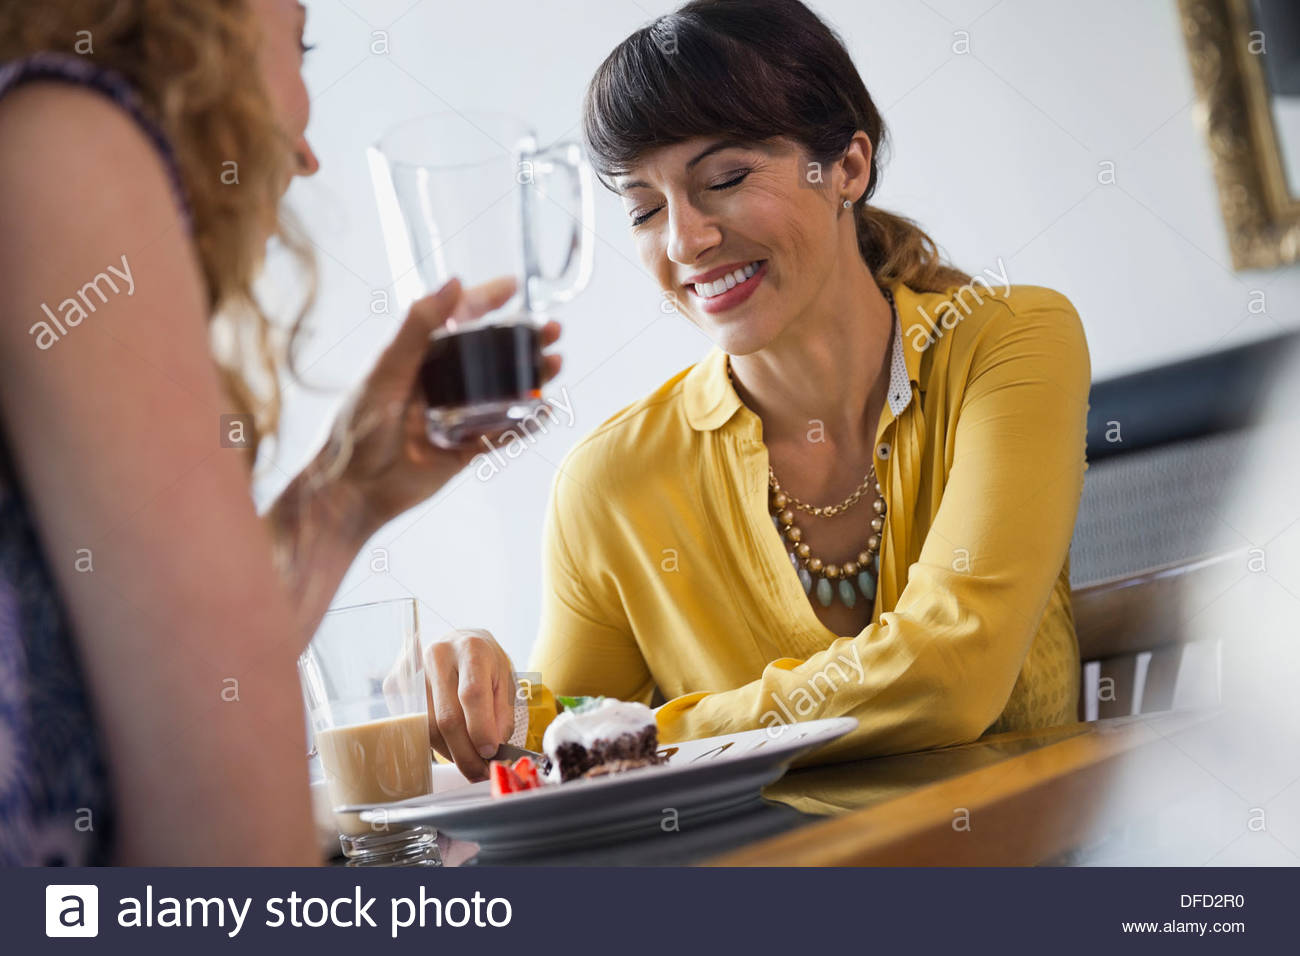 Female friends laughing while dining out Stock Photo